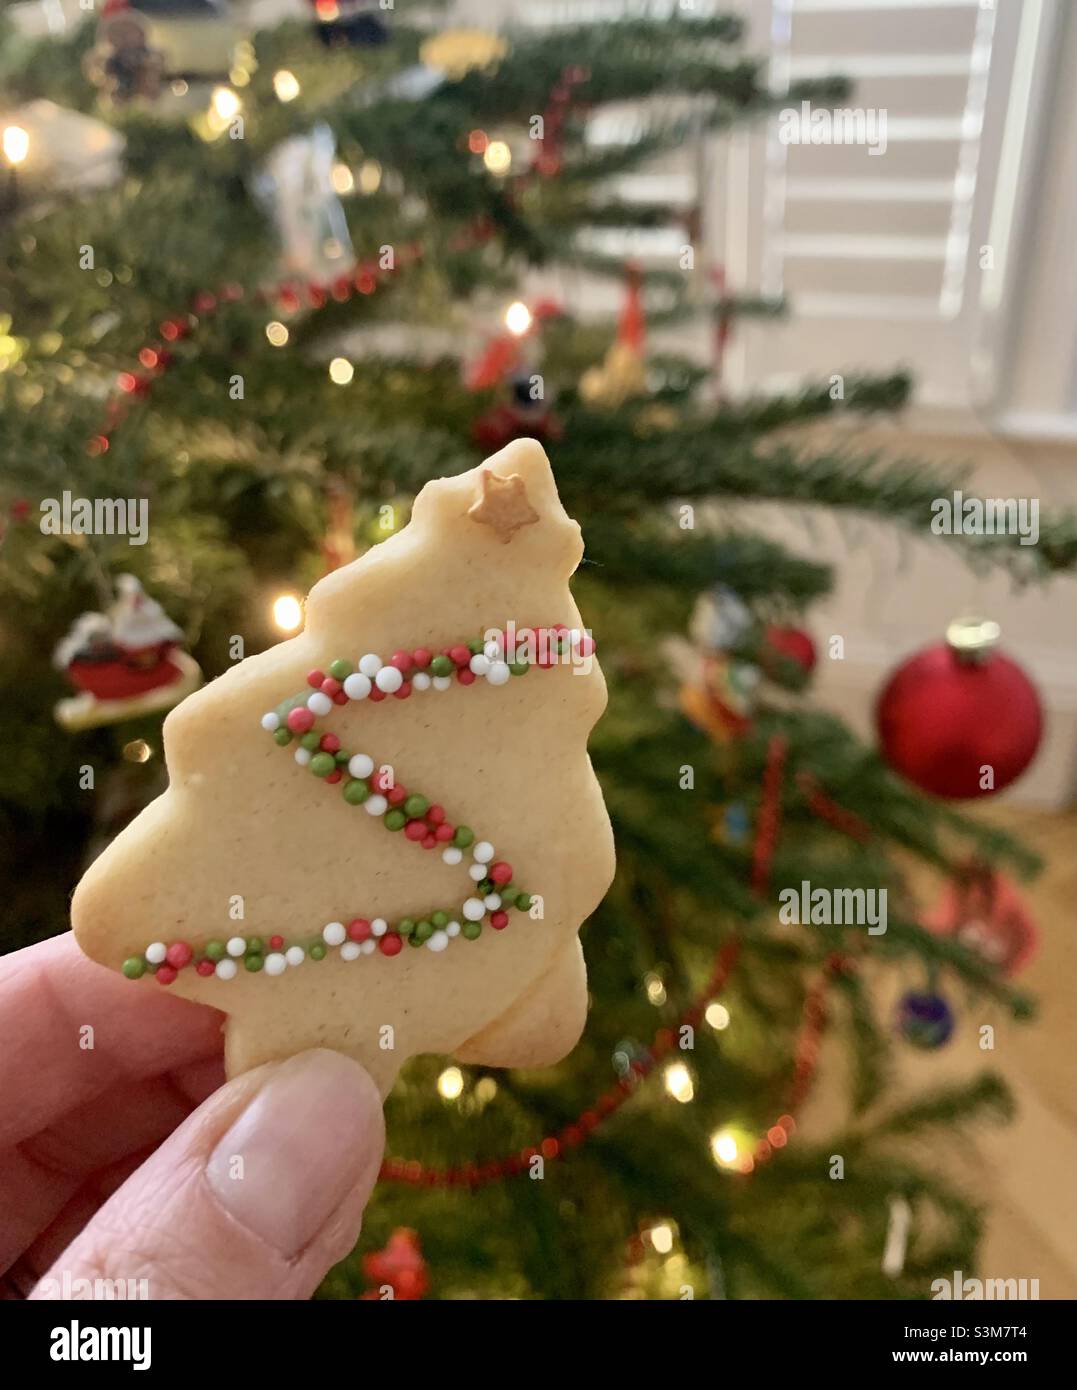 Home baked tree biscuit in front of Christmas tree Stock Photo